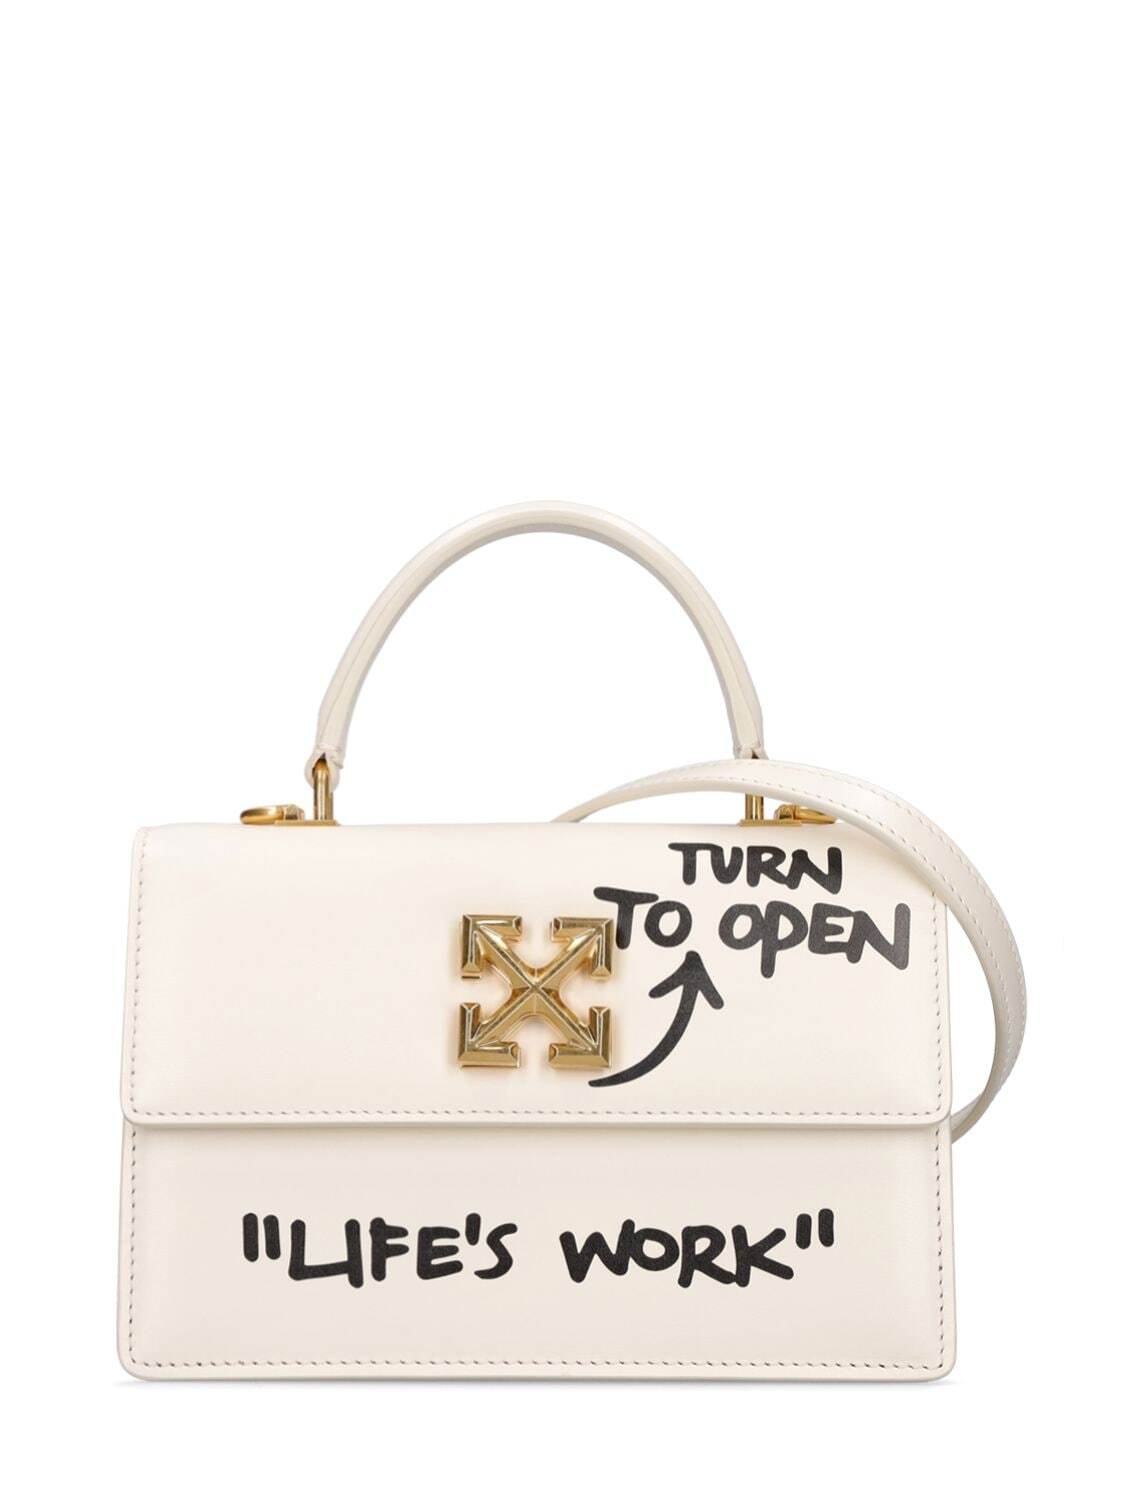 OFF-WHITE Jitney 1.4 Leather Top Handle Bag in white